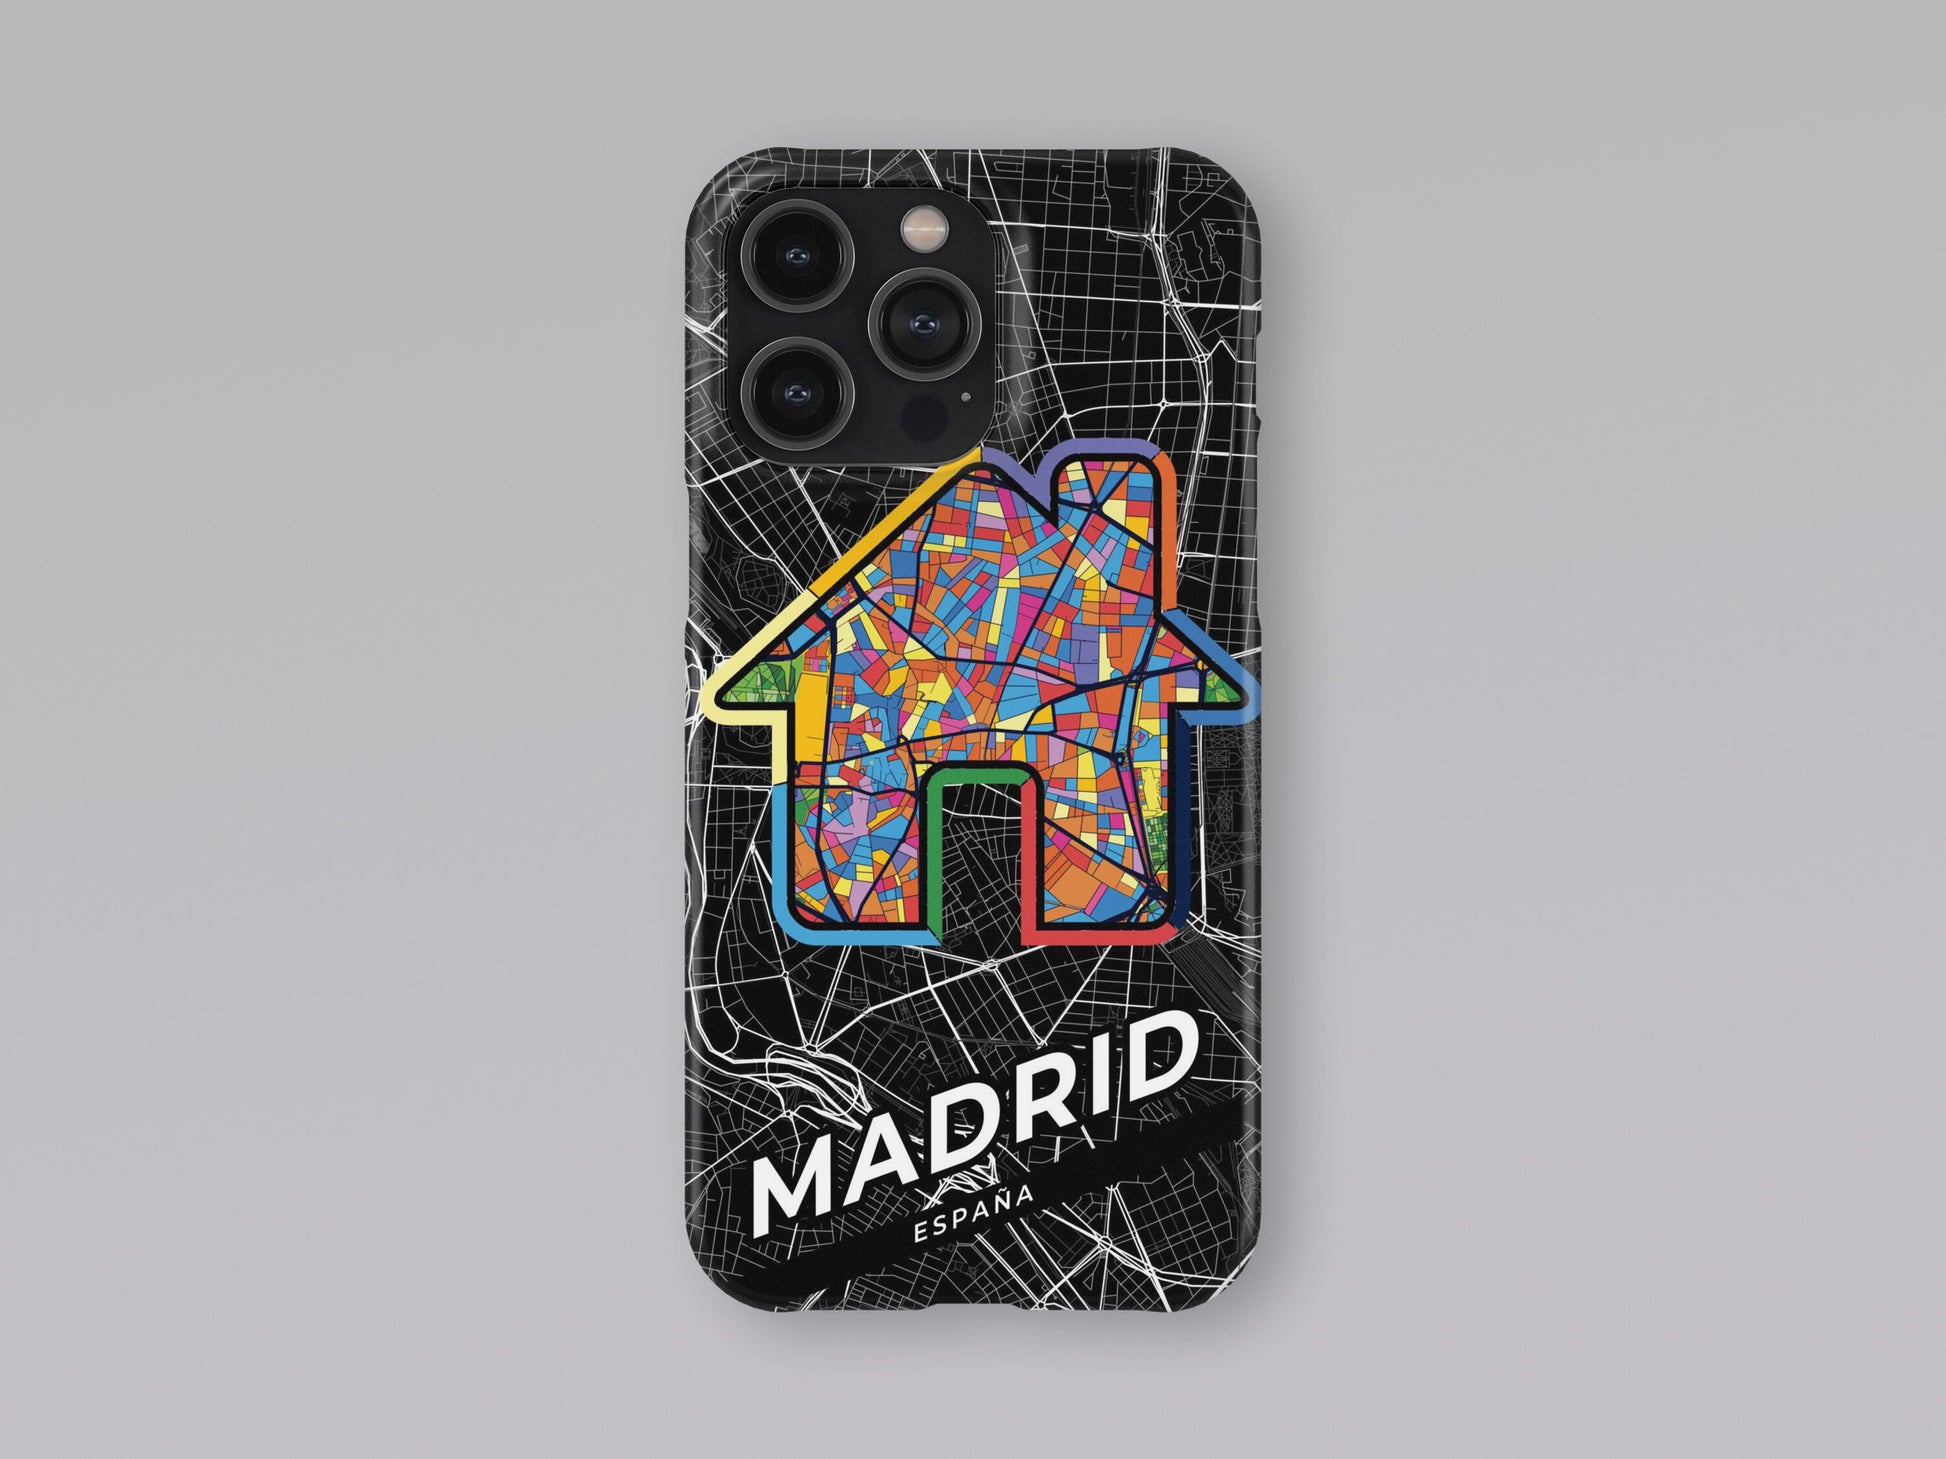 Madrid Spain slim phone case with colorful icon. Birthday, wedding or housewarming gift. Couple match cases. 3